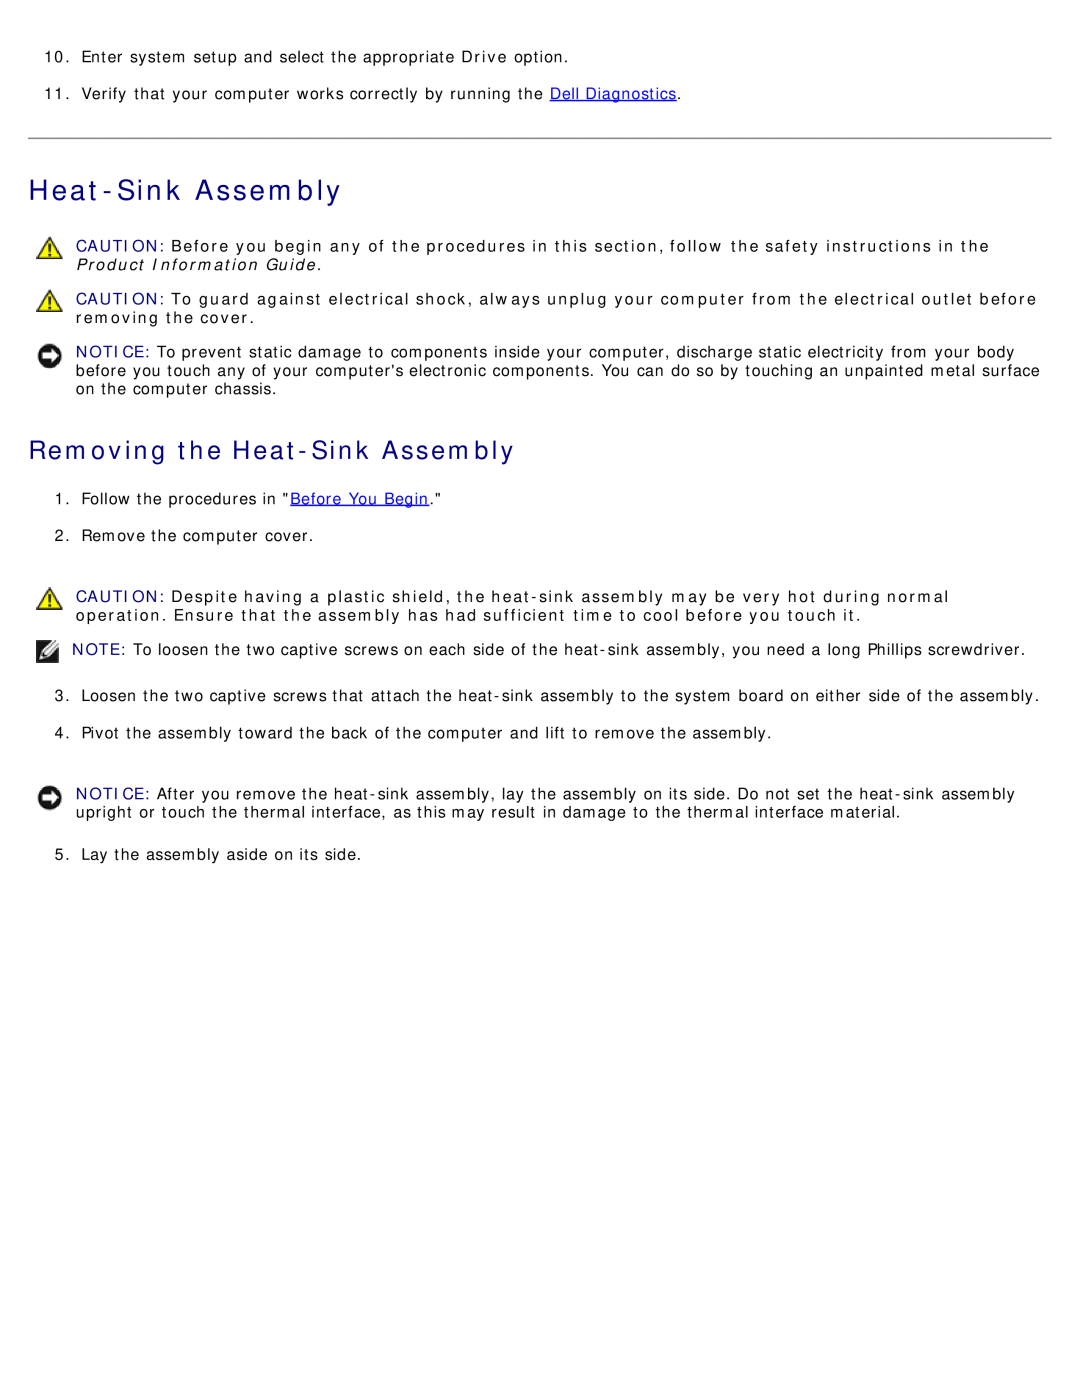 Dell DCSM manual Removing the Heat-Sink Assembly 